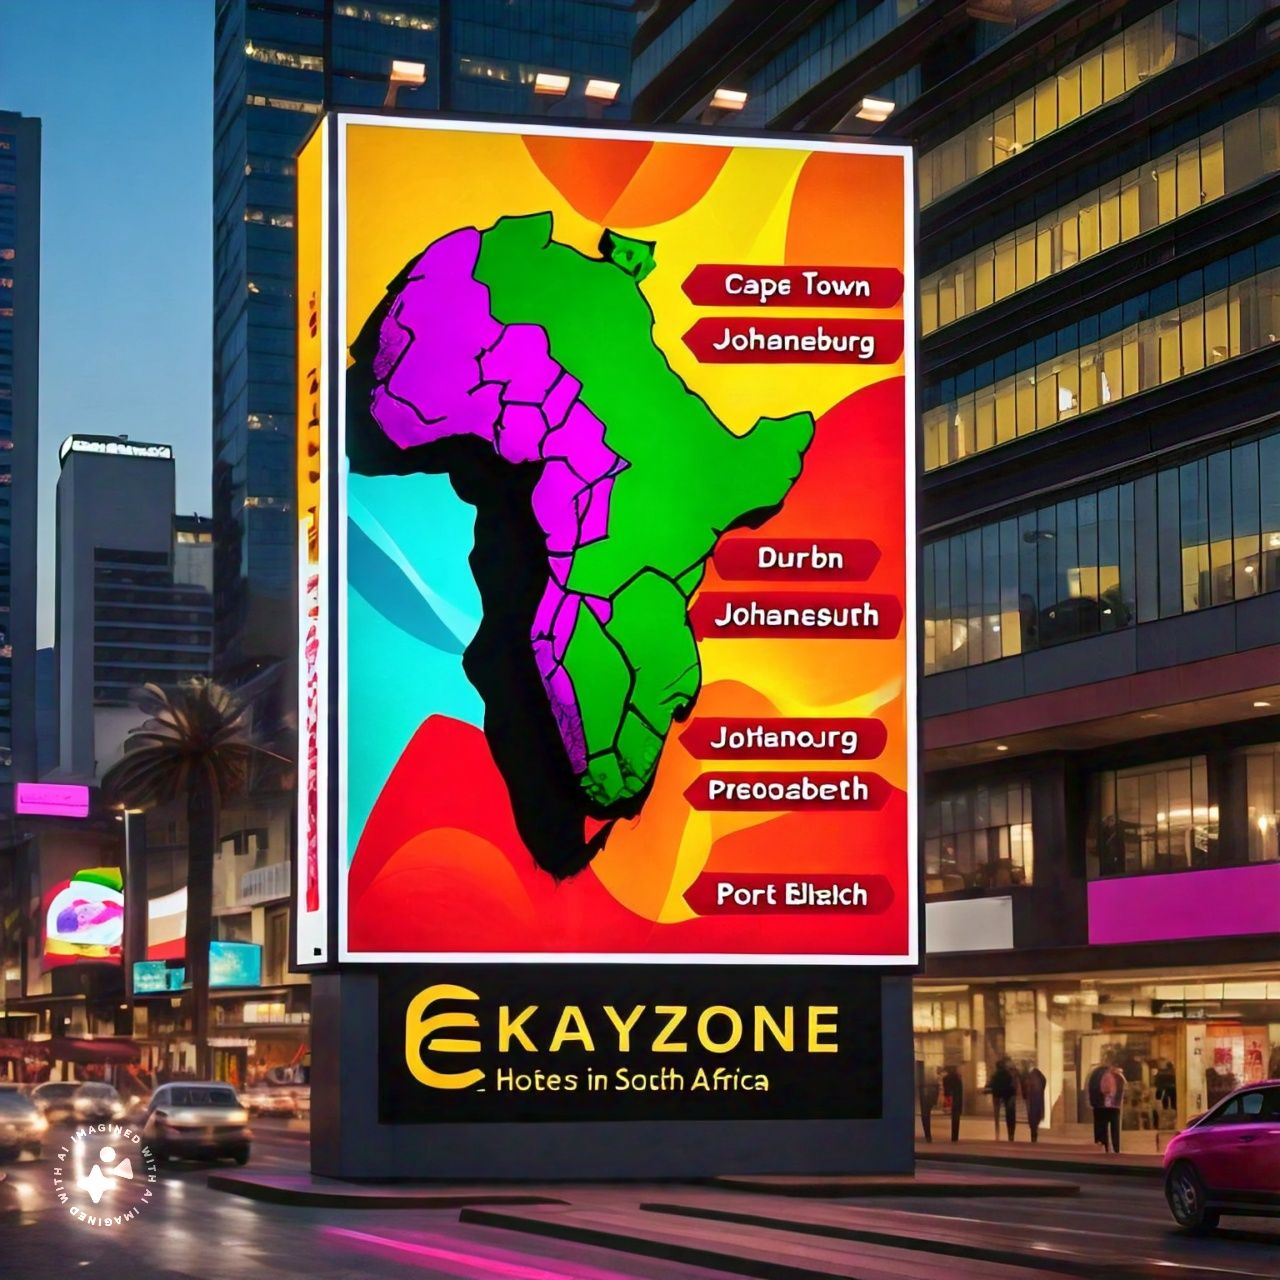 Book or Advertise Hotels in South Africa with Ekayzone